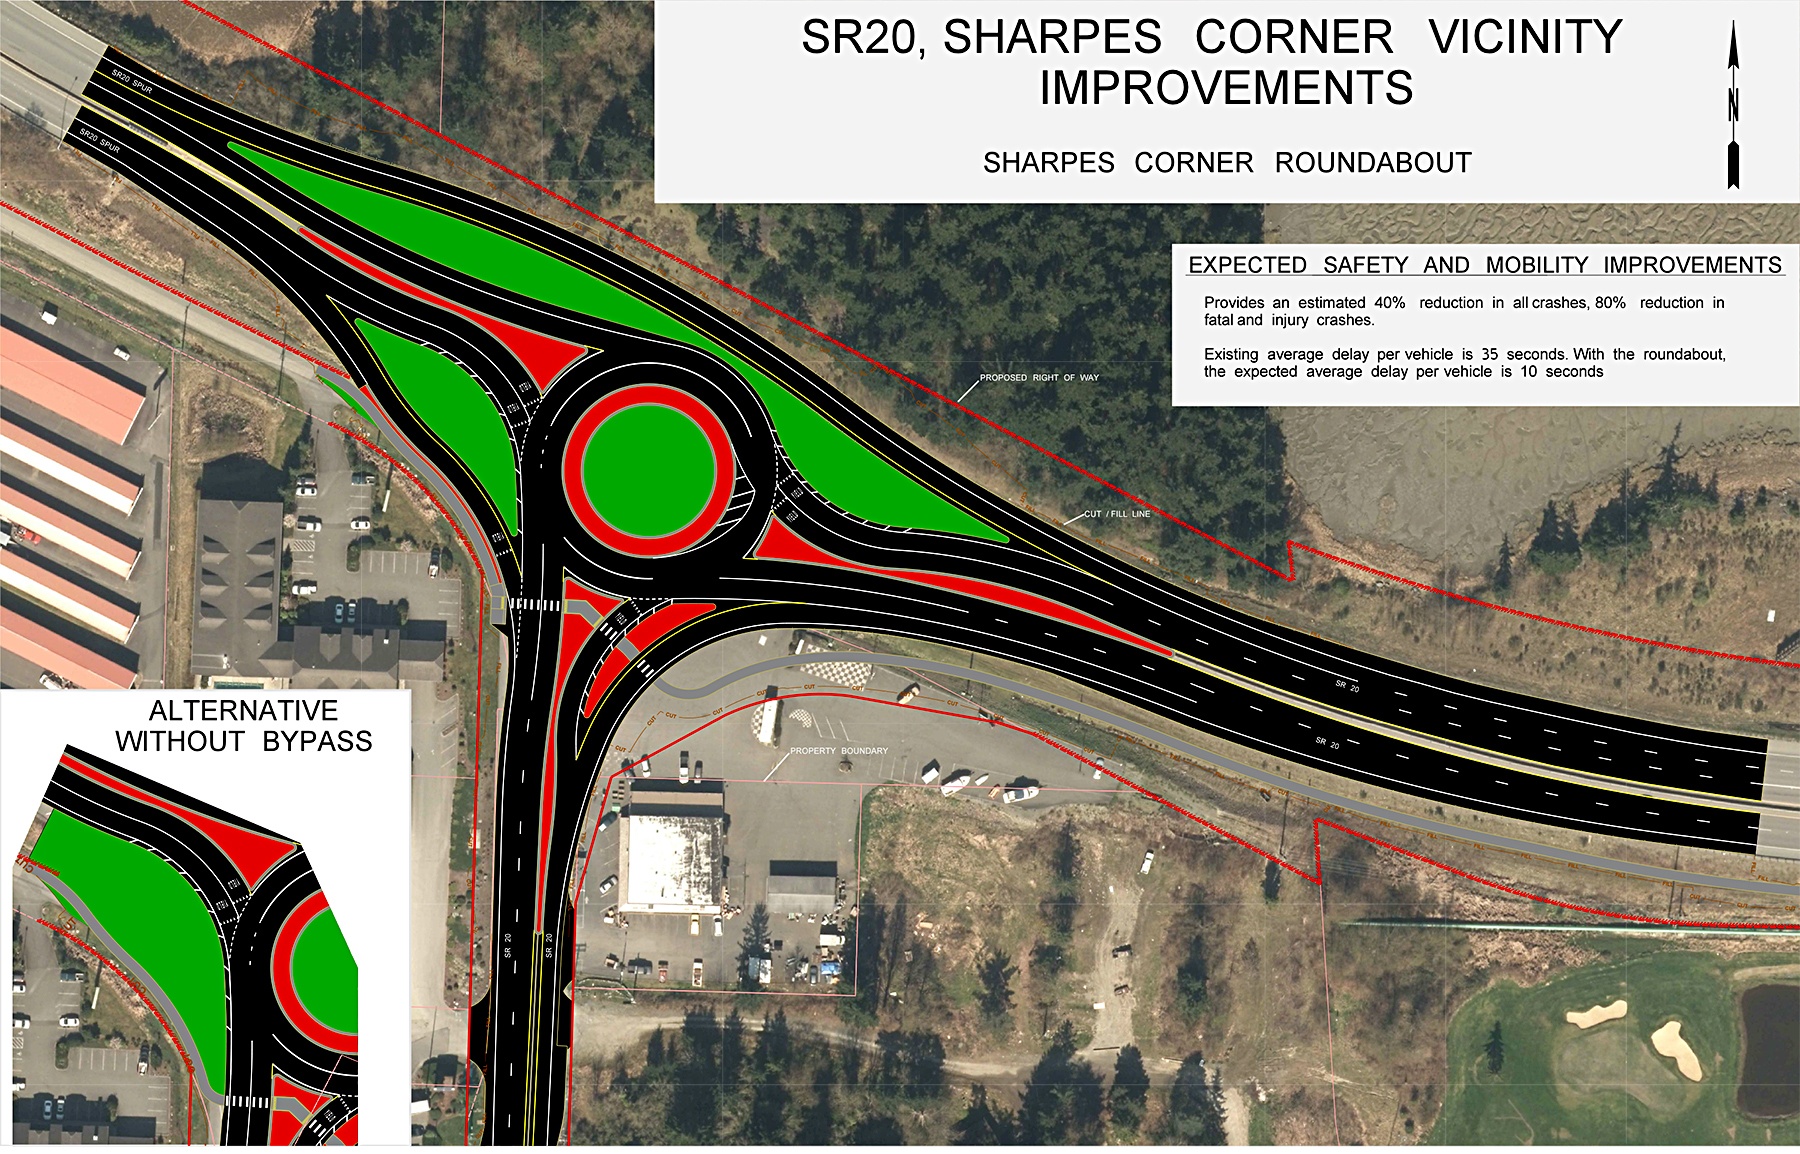 State is holding an open house in Oak Harbor Thursday on Sharpes Corner roundabouts